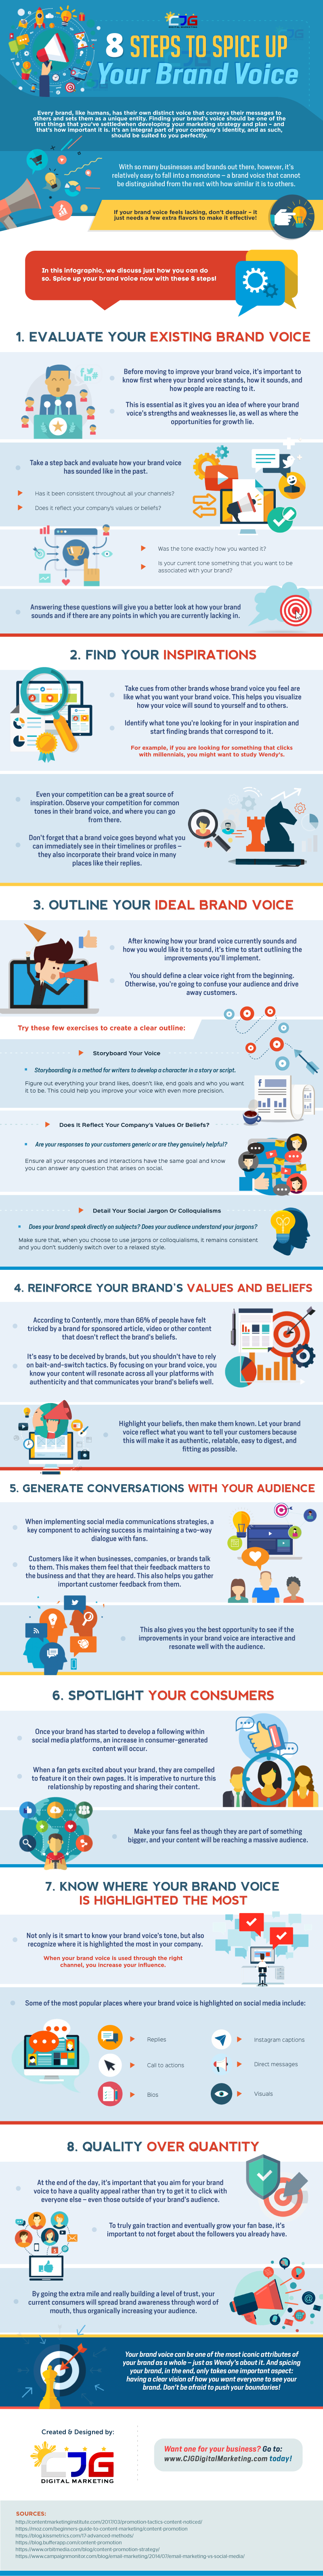 8 Steps to Spice Up Your Brand Voice (Infographic) - An Infographic from CJG Digital Marketing